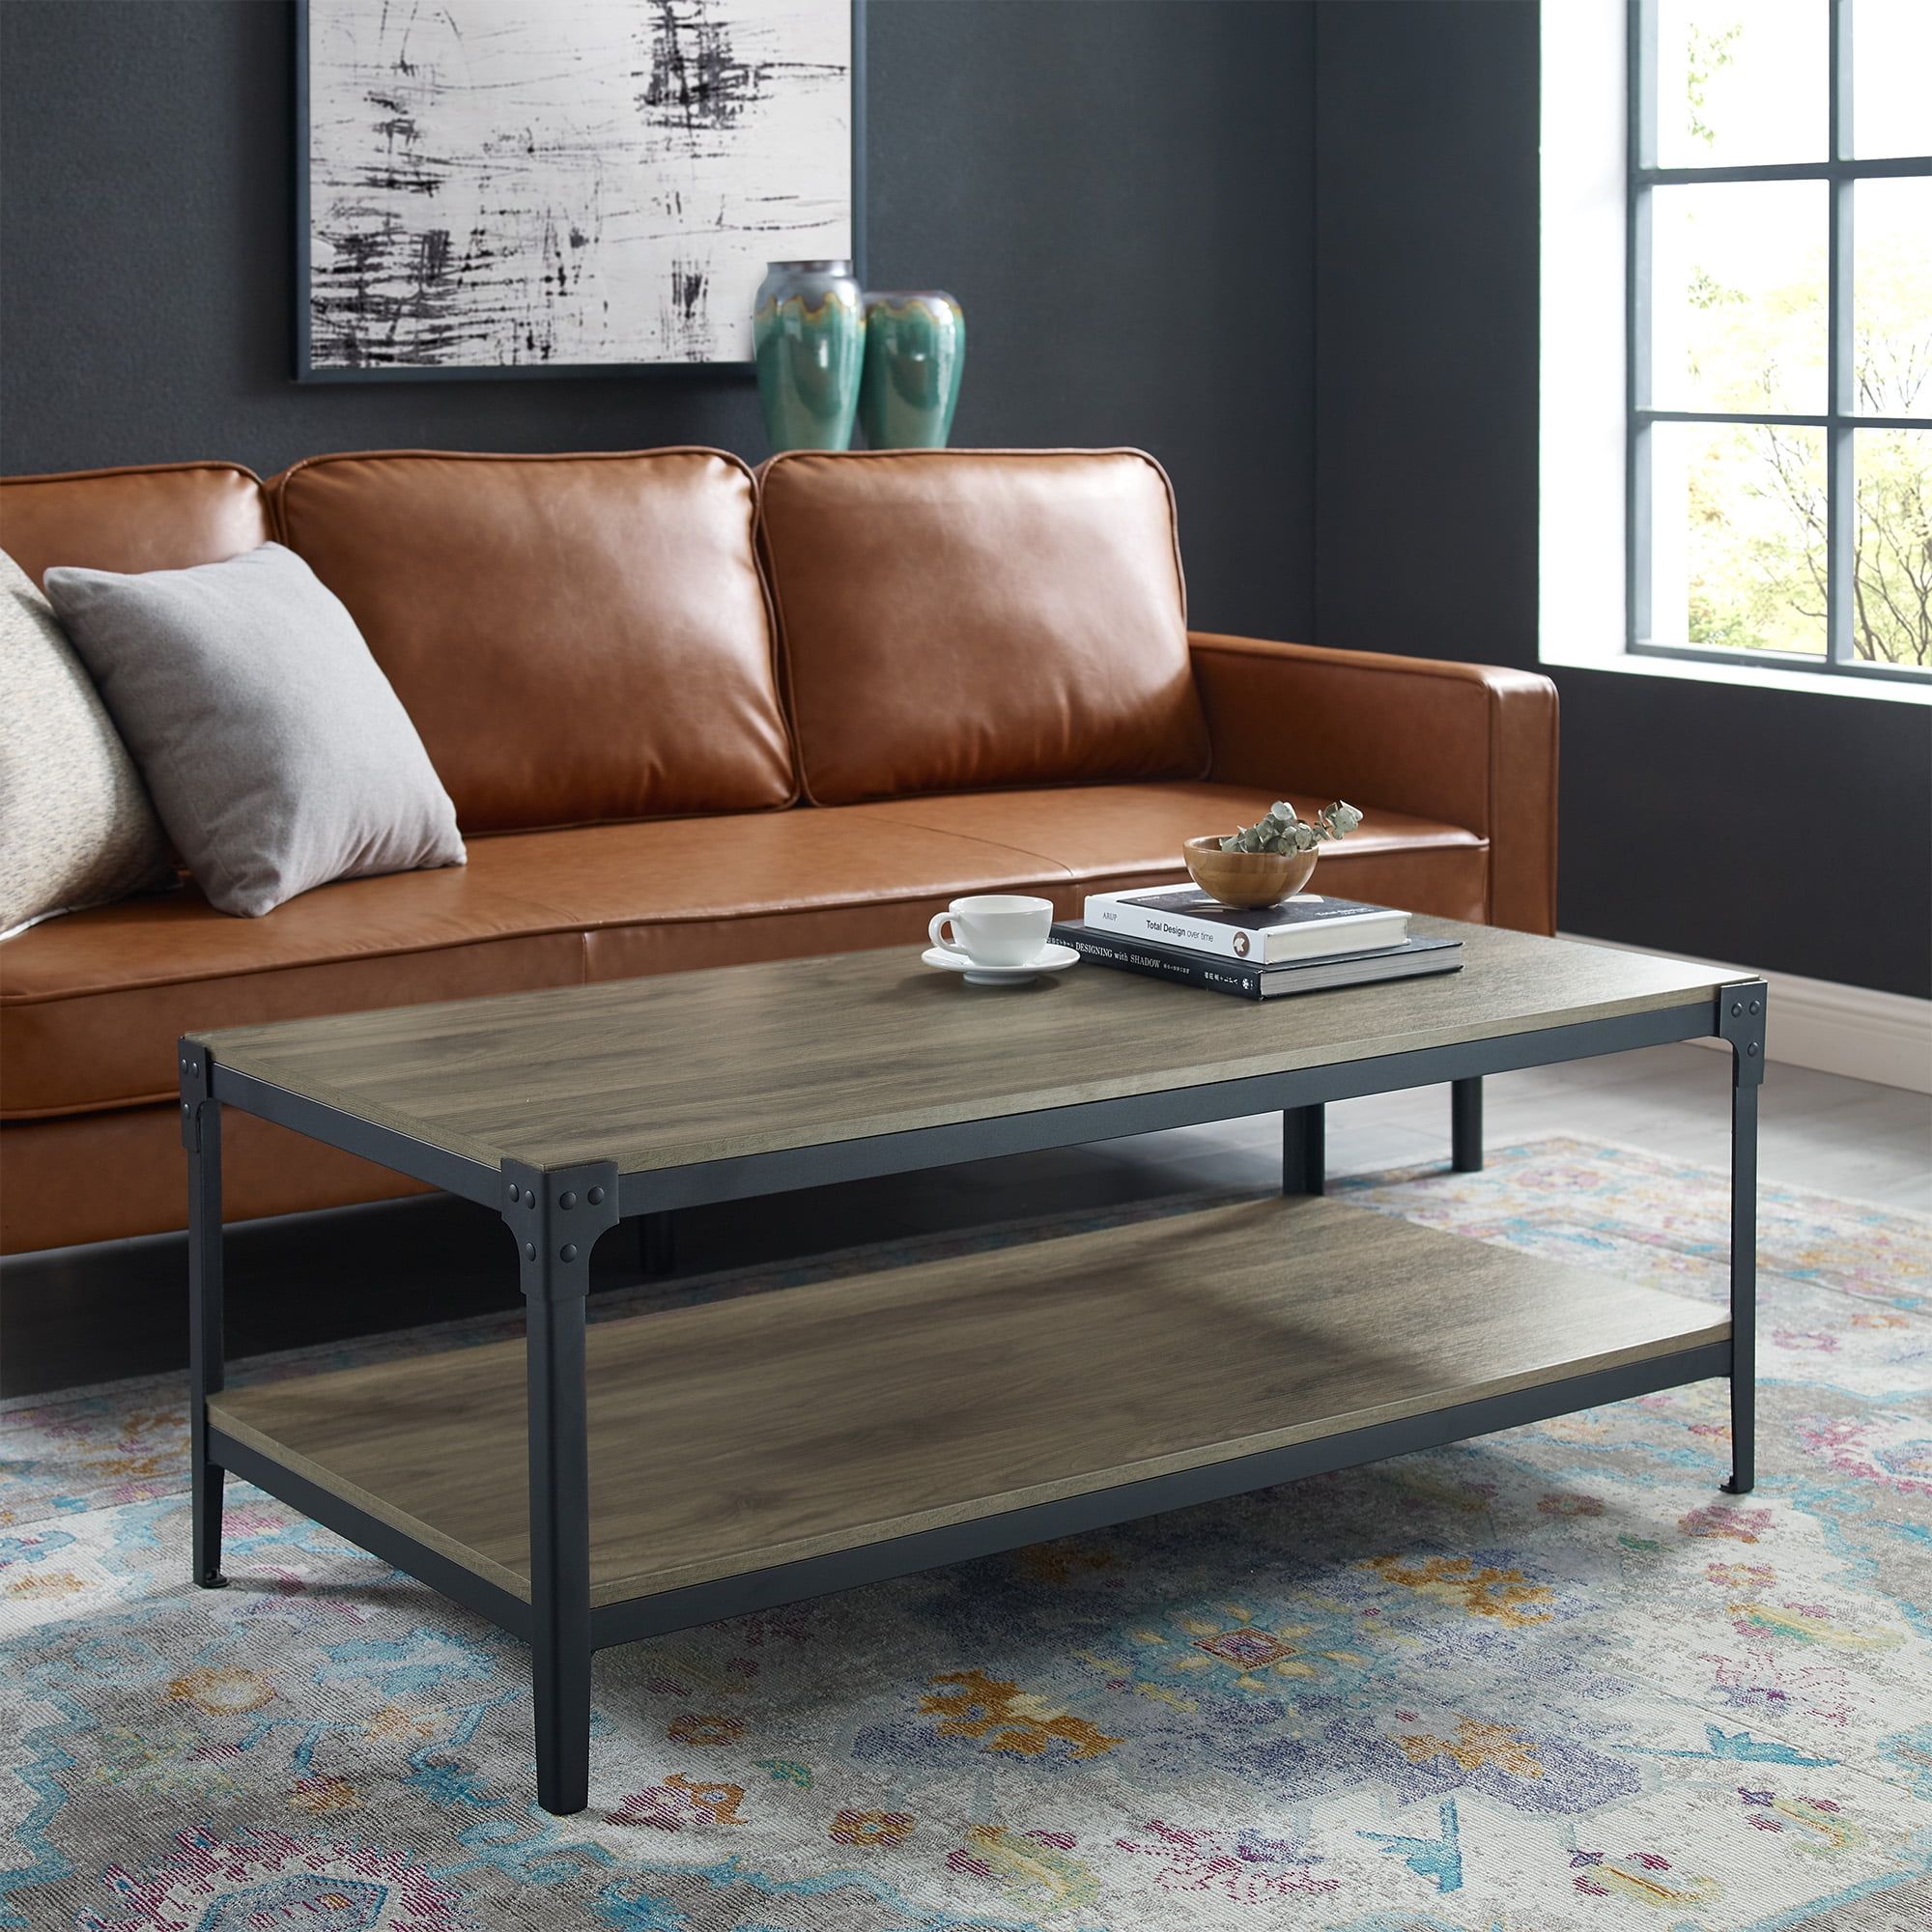 Woven Paths Wilson Angle Iron Rustic Coffee Table, Slate Grey – Walmart With Woven Paths Coffee Tables (View 15 of 15)